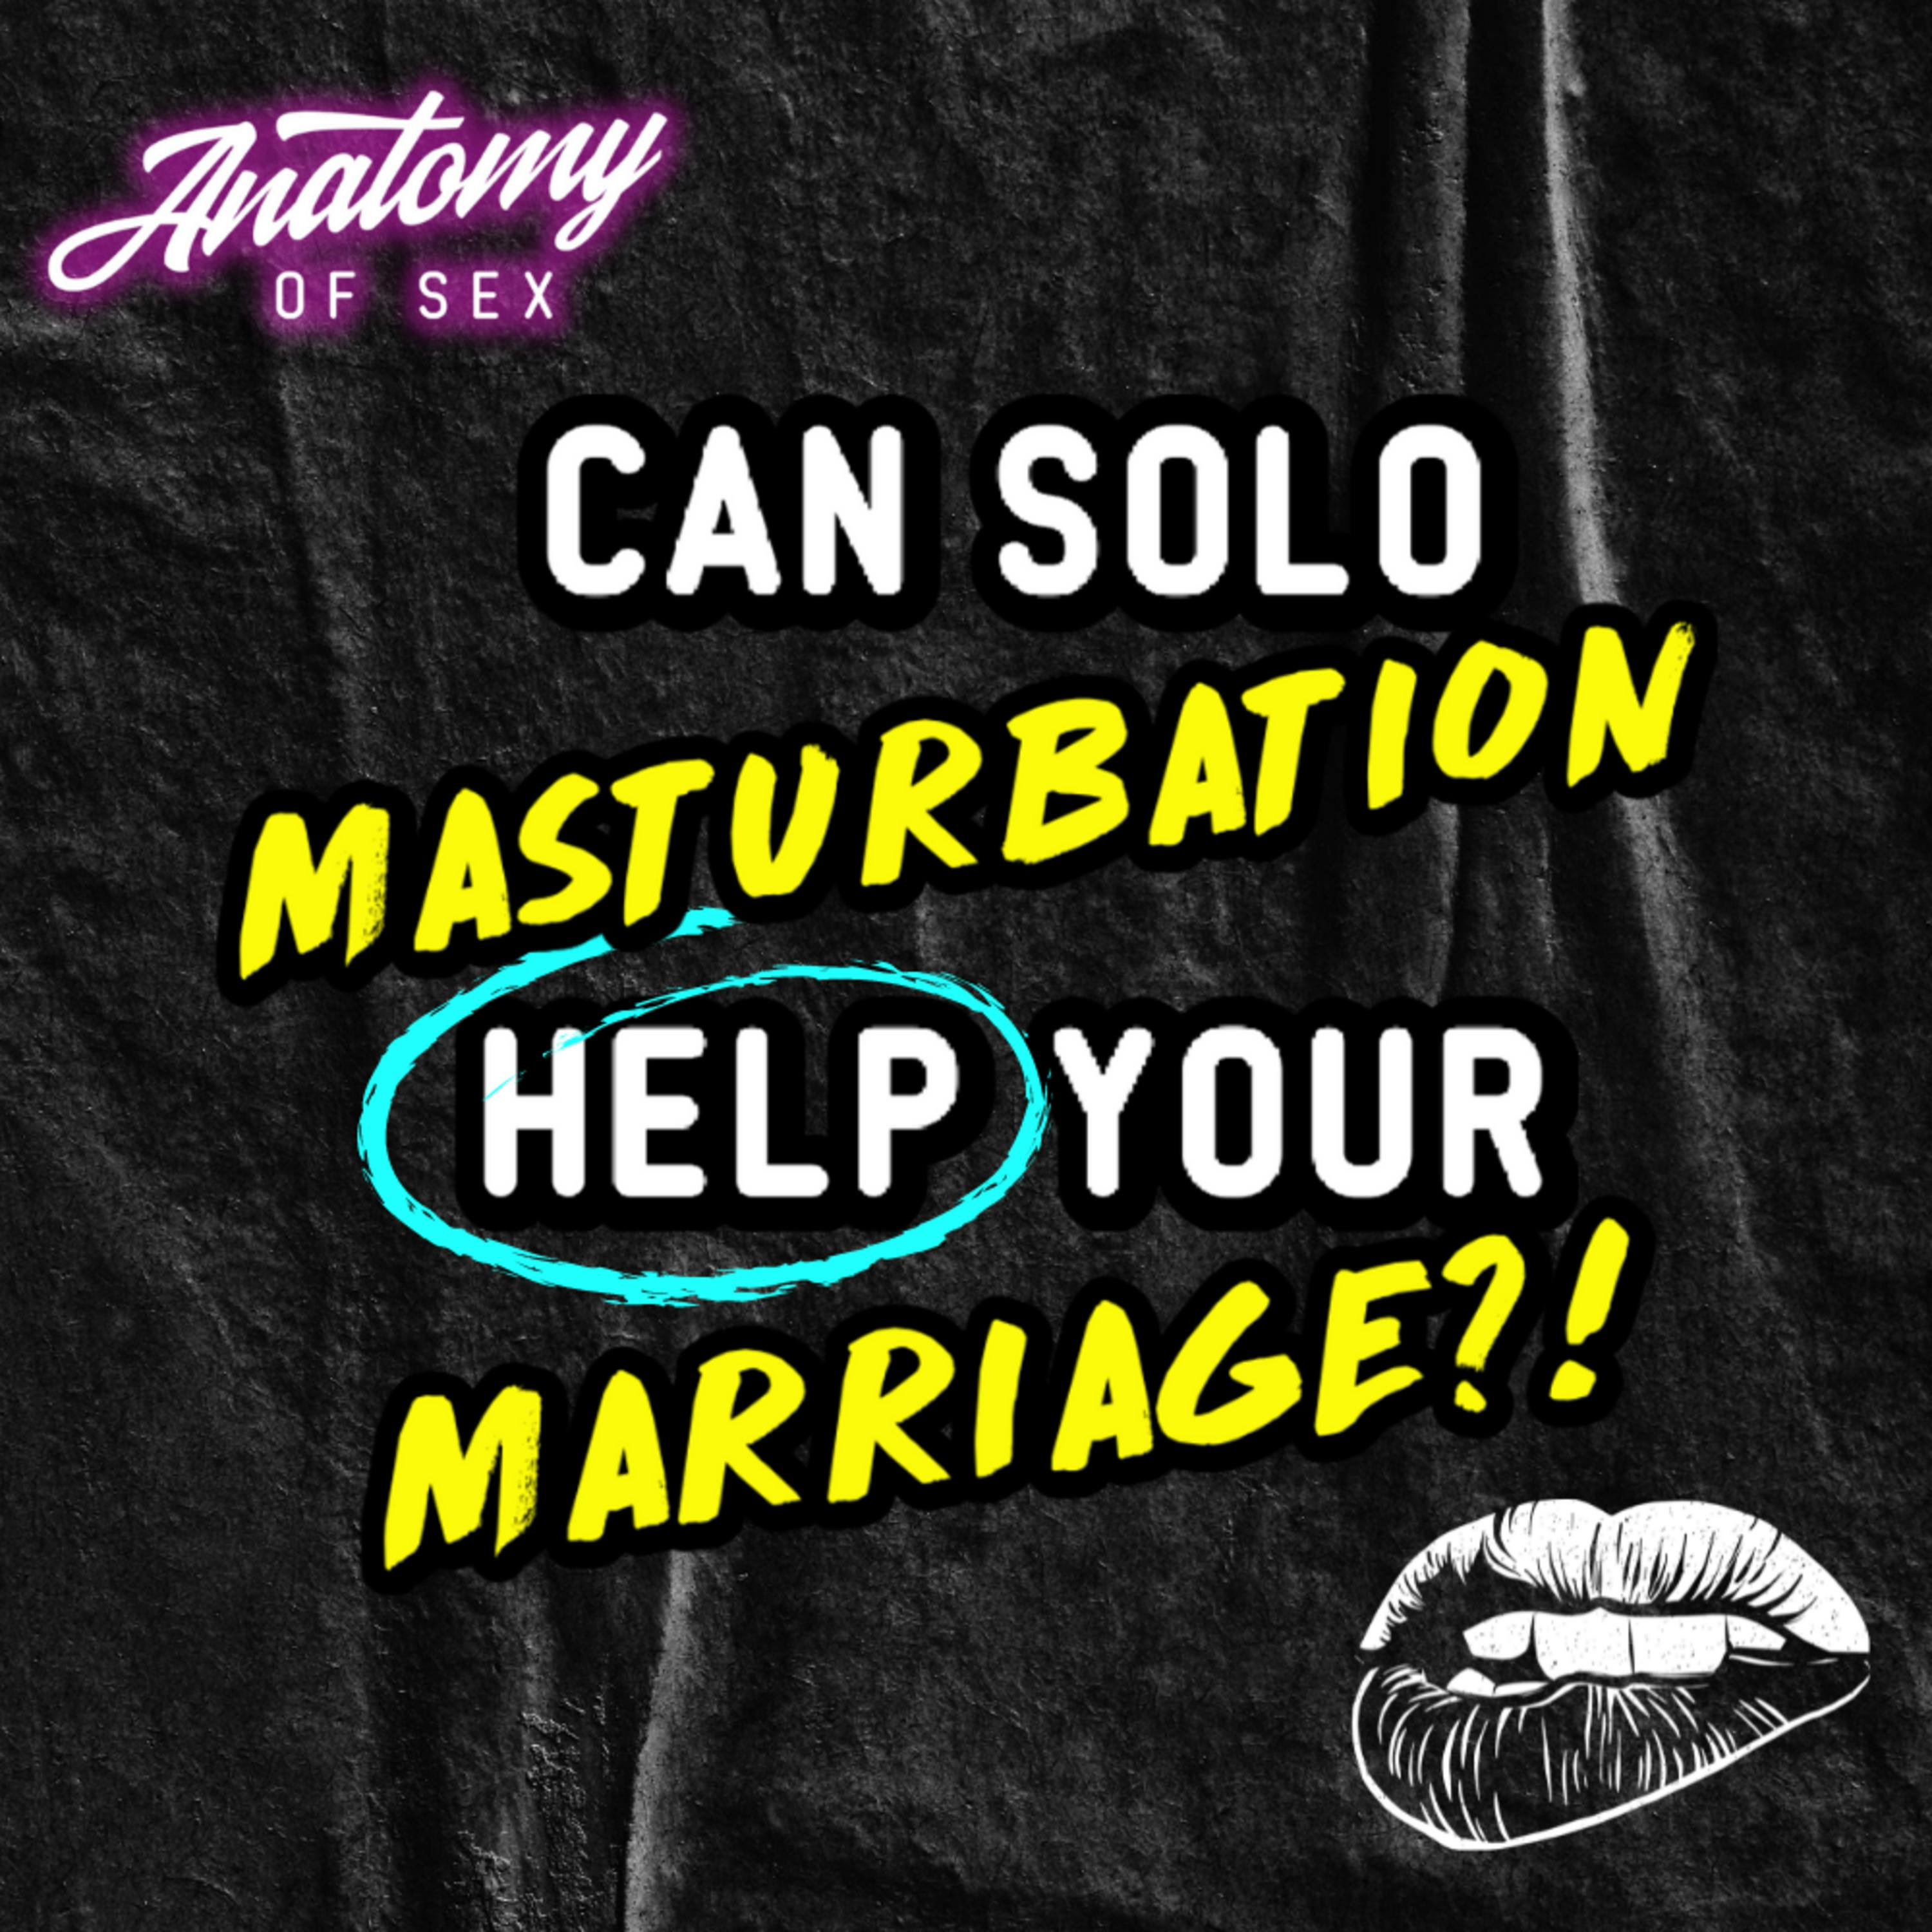 SEX: Can Solo Masturbation Help Your Marriage?